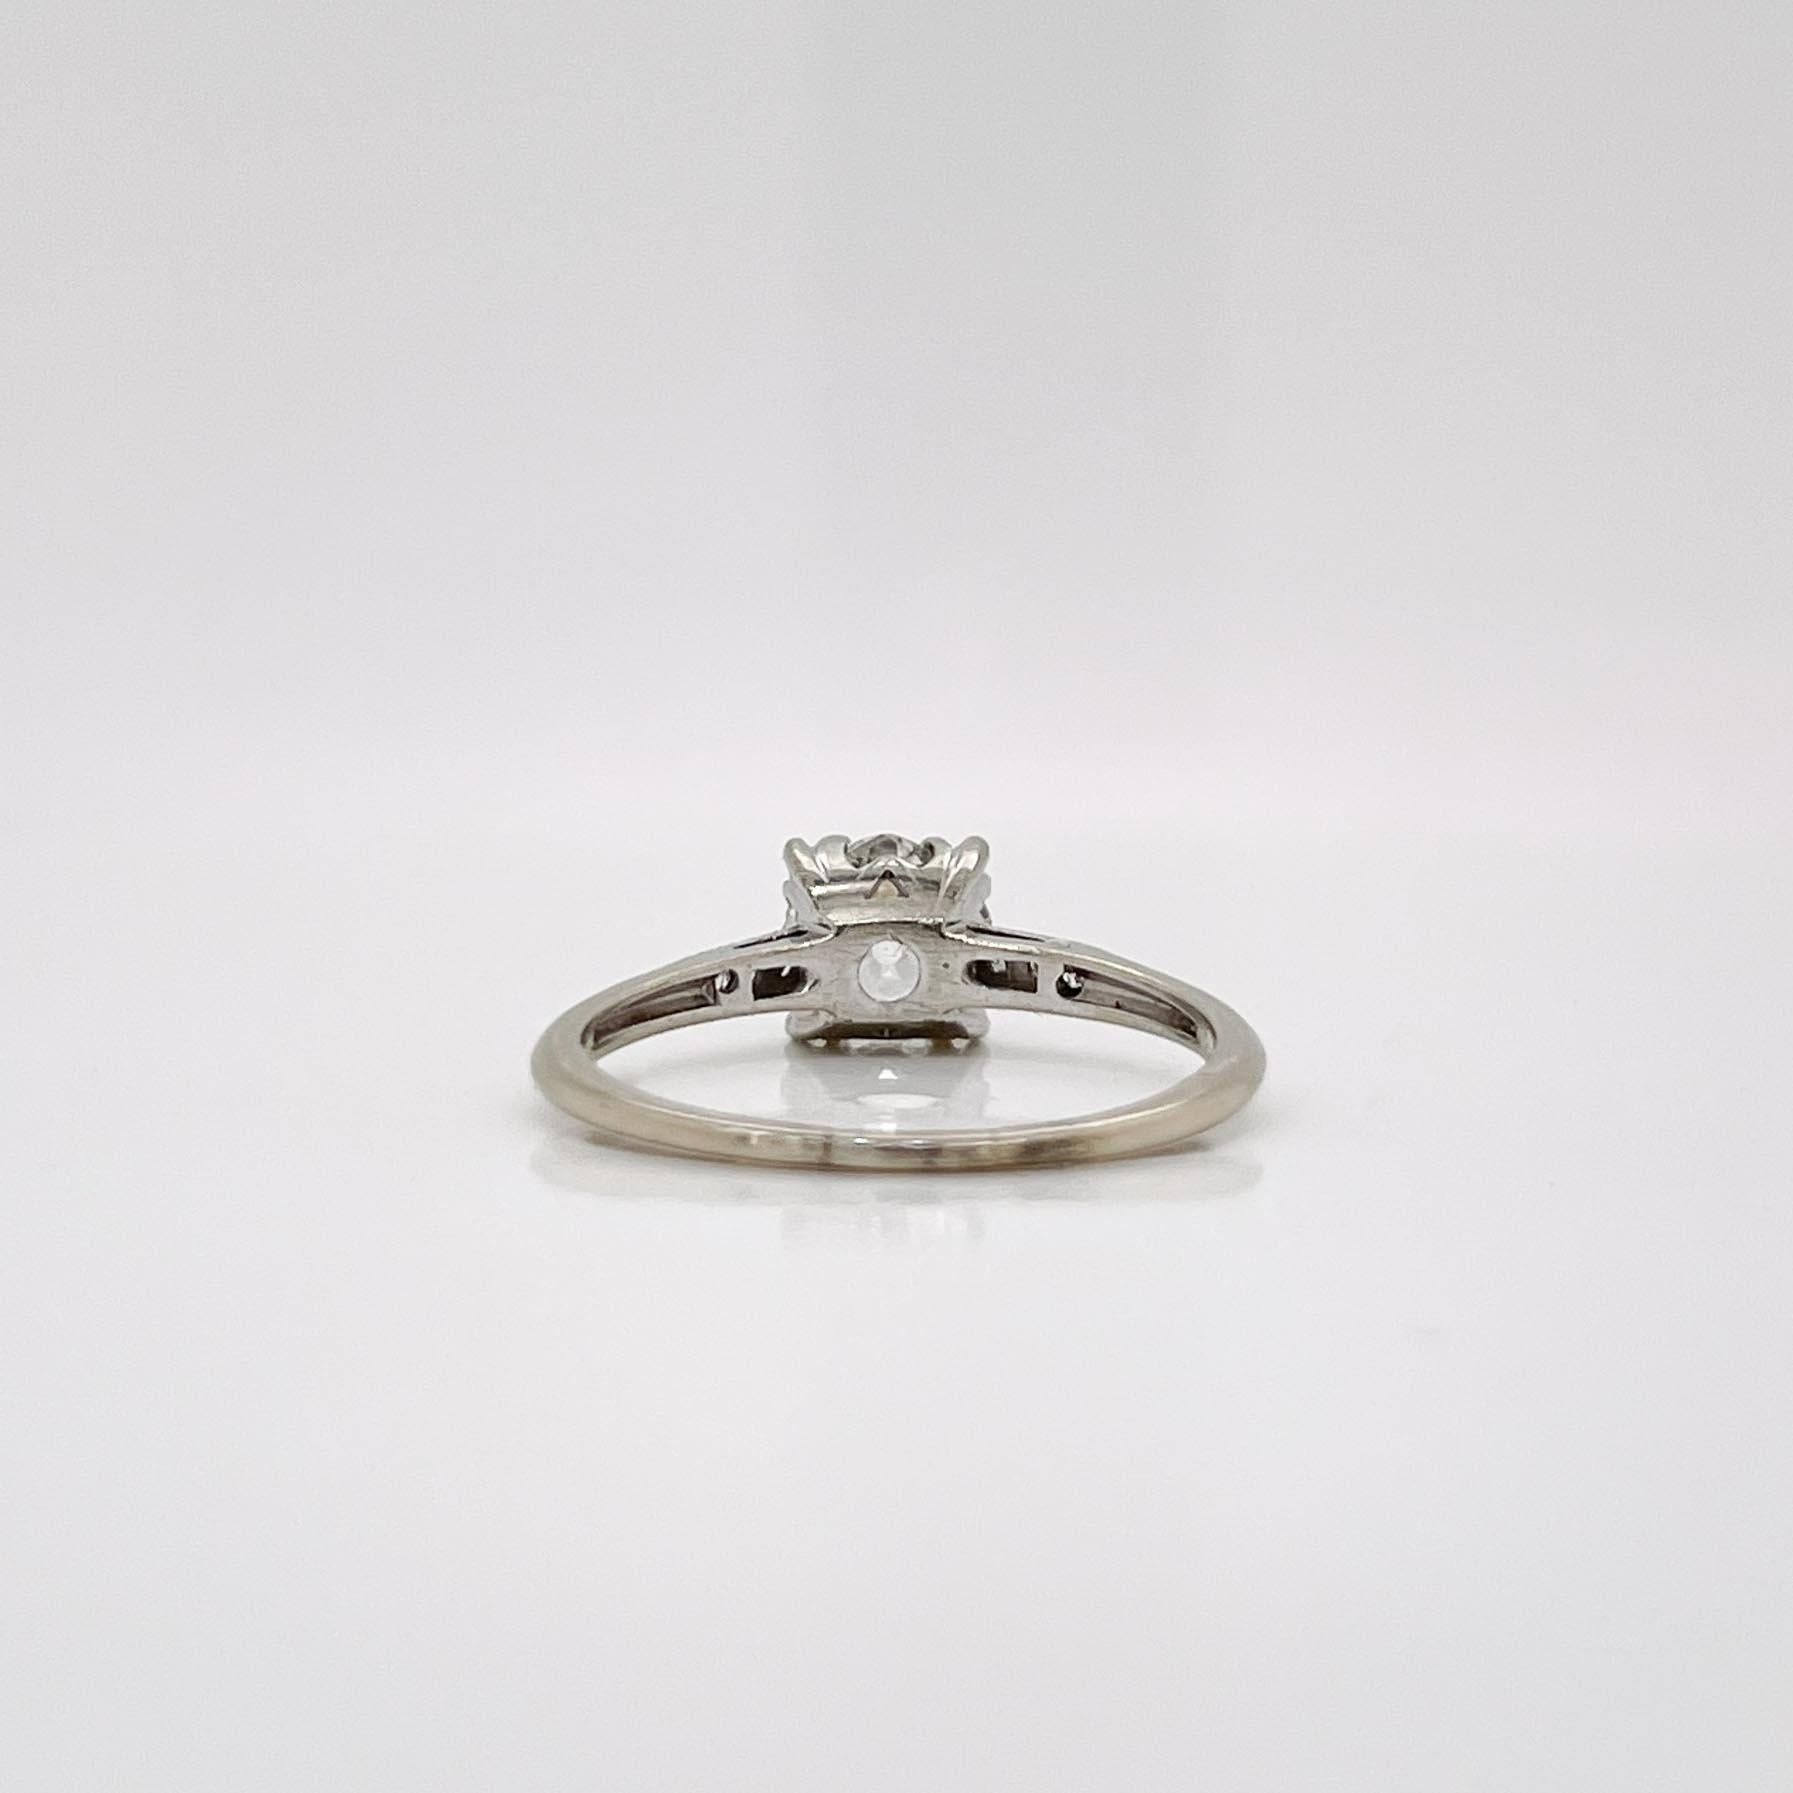 Vintage 14k White Gold & Old Mine Cut Diamond Engagement Ring In Fair Condition For Sale In Philadelphia, PA